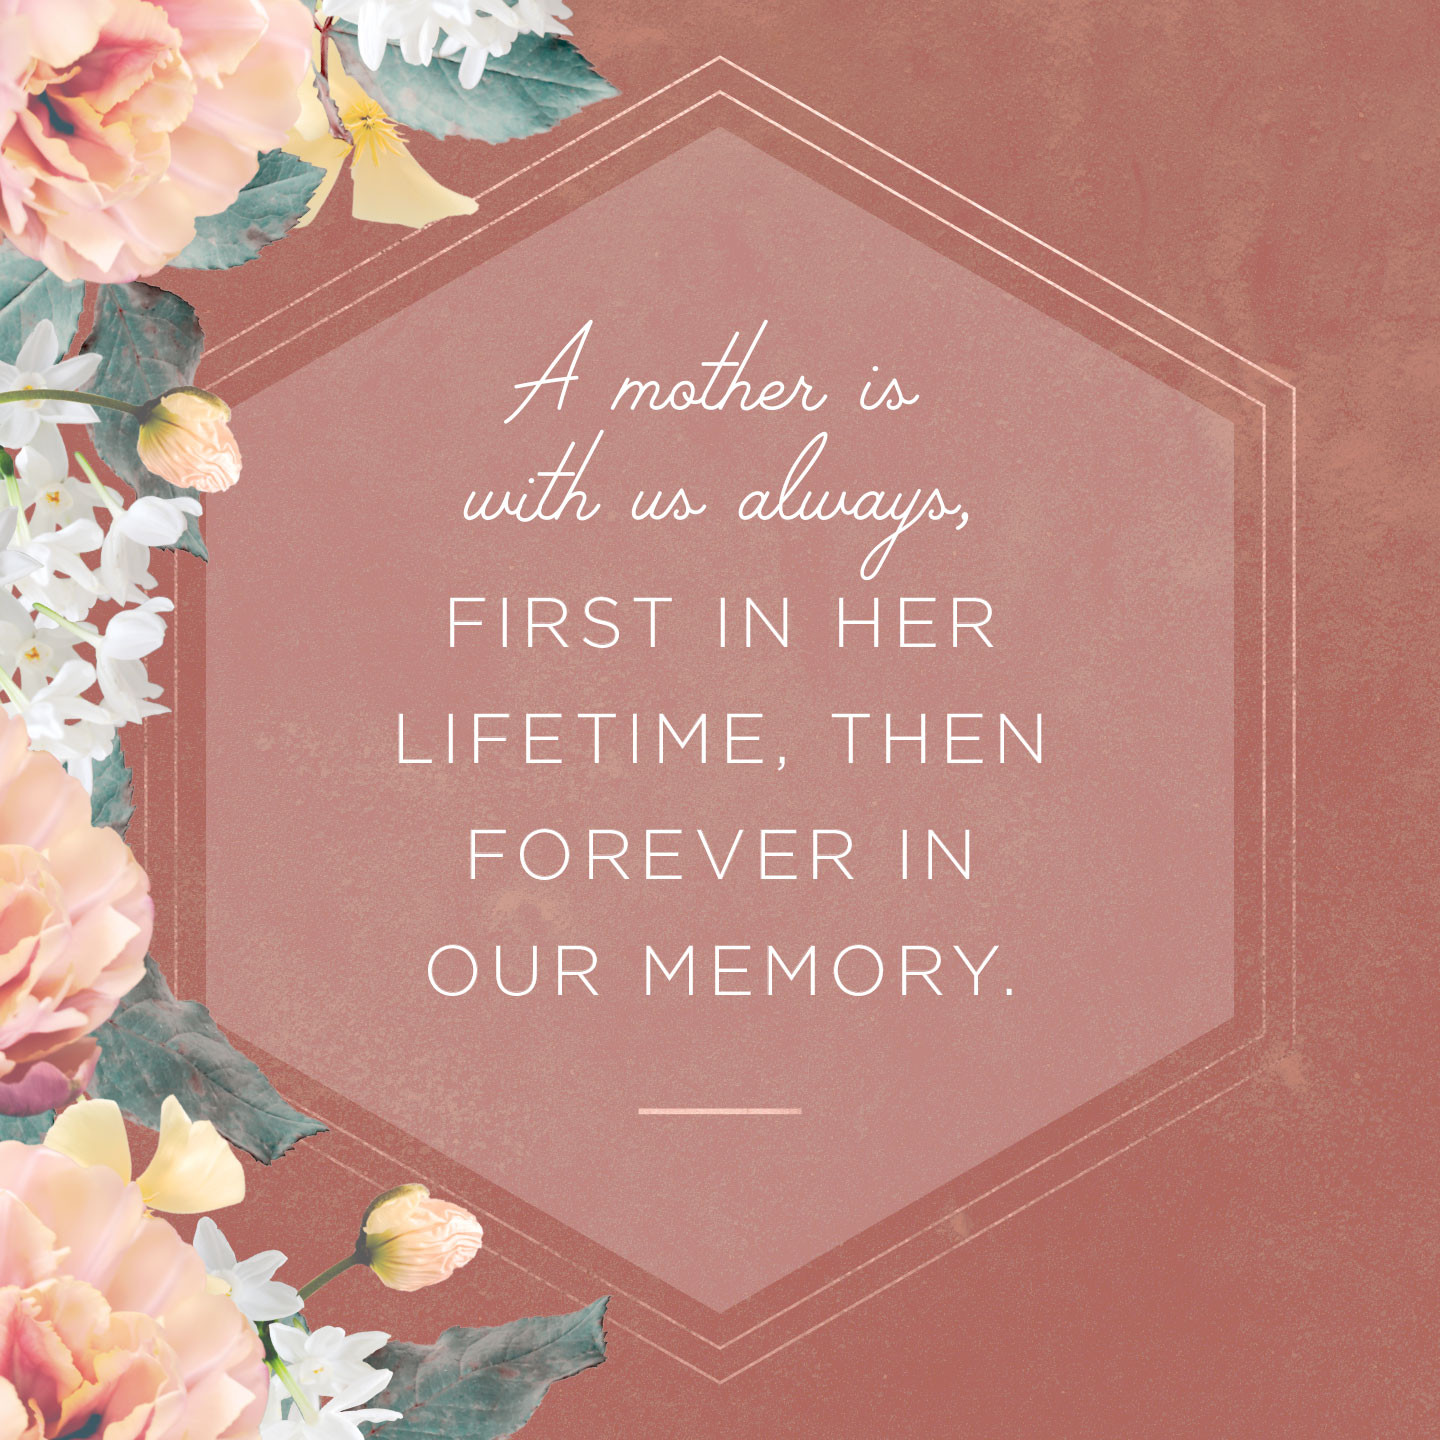 Condolence Quotes For Loss Of Mother
 36 Sympathy Messages What to Write in a Condolence Card